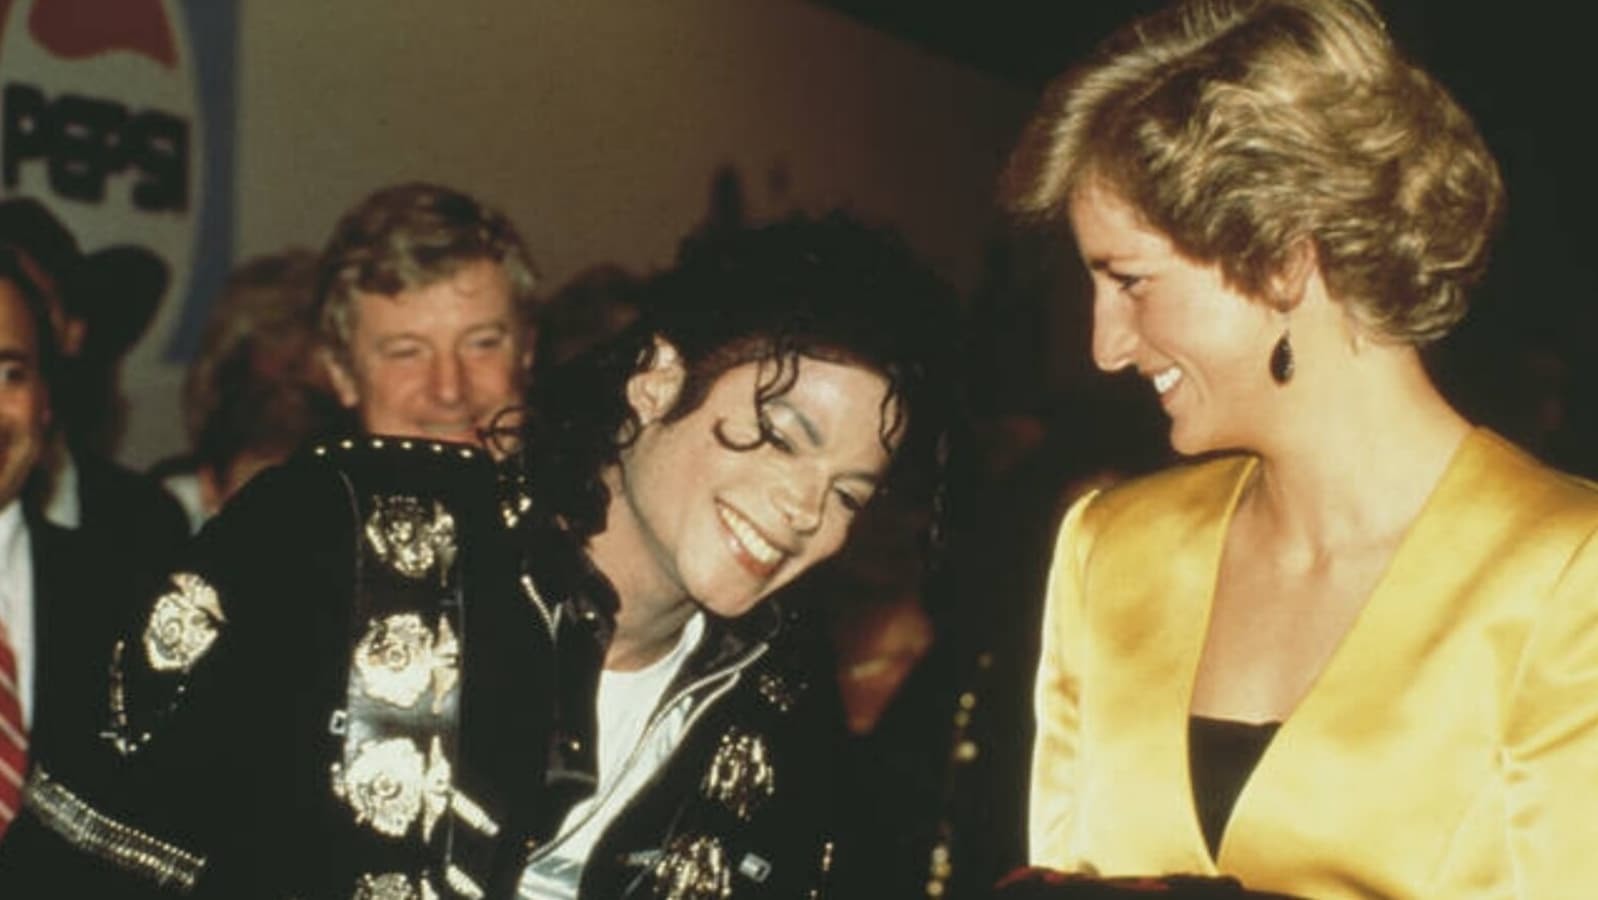 When Michael Jackson was stumped by Princess Diana’s cheeky request at a concert. Watch